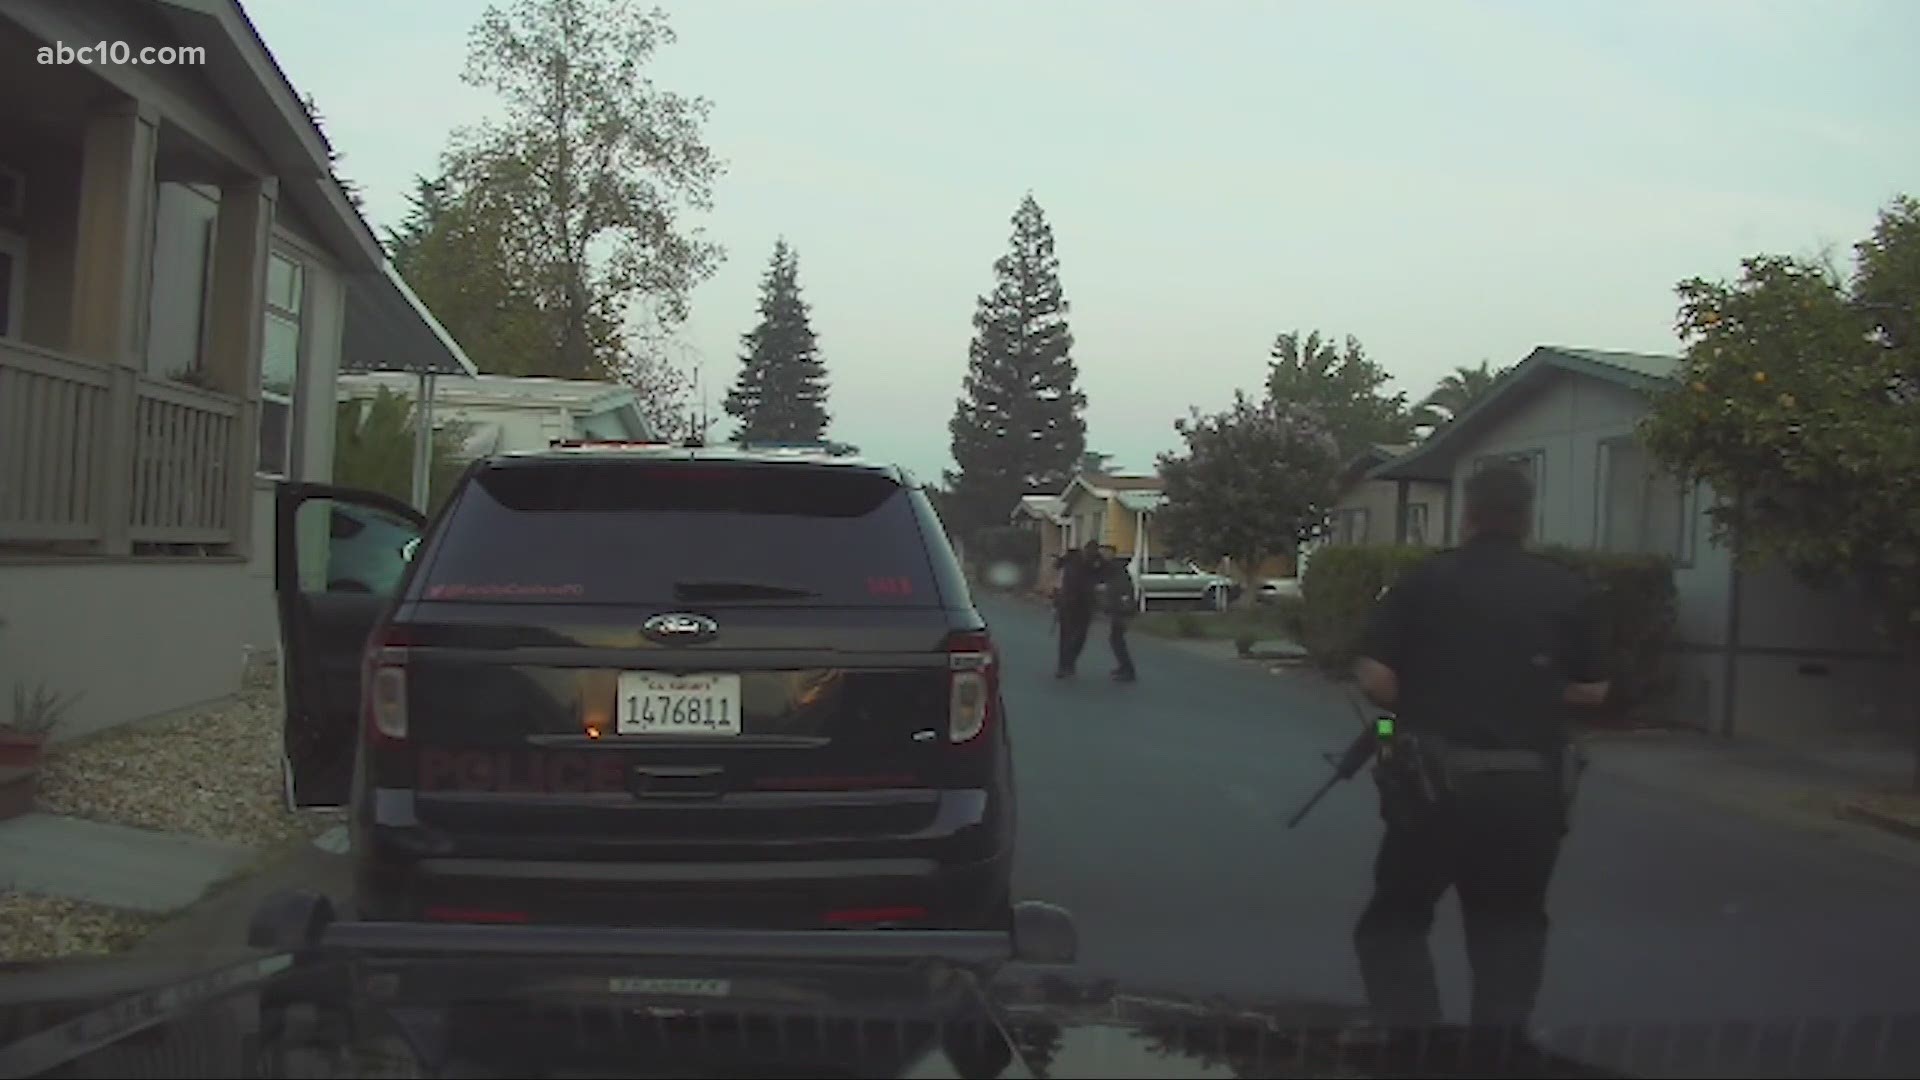 Sacramento County Sheriff's Department released a video with new information and dashcam footage from a shooting that left two dead and put a deputy in the hospital.